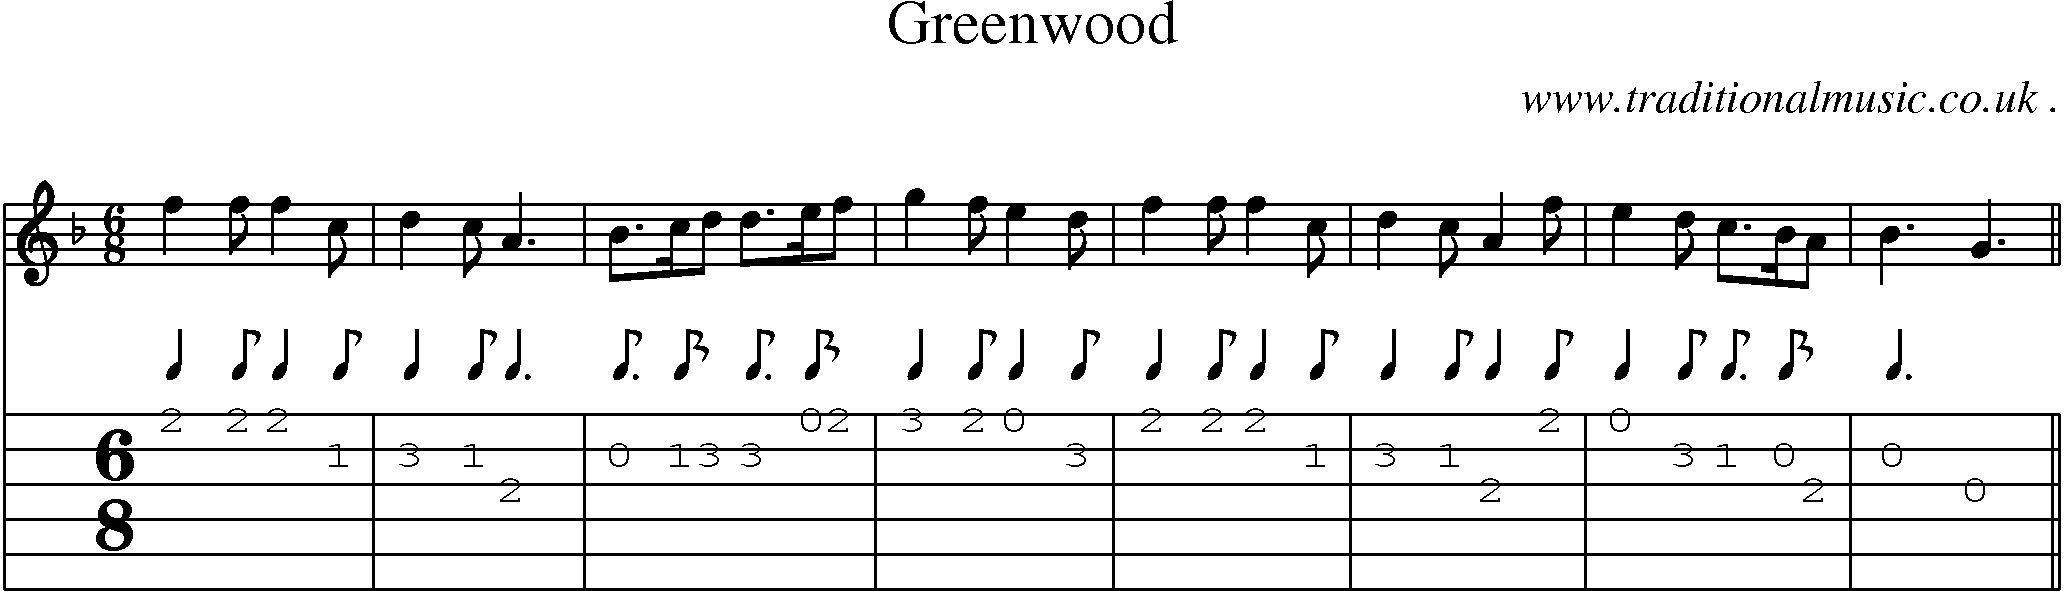 Sheet-Music and Guitar Tabs for Greenwood